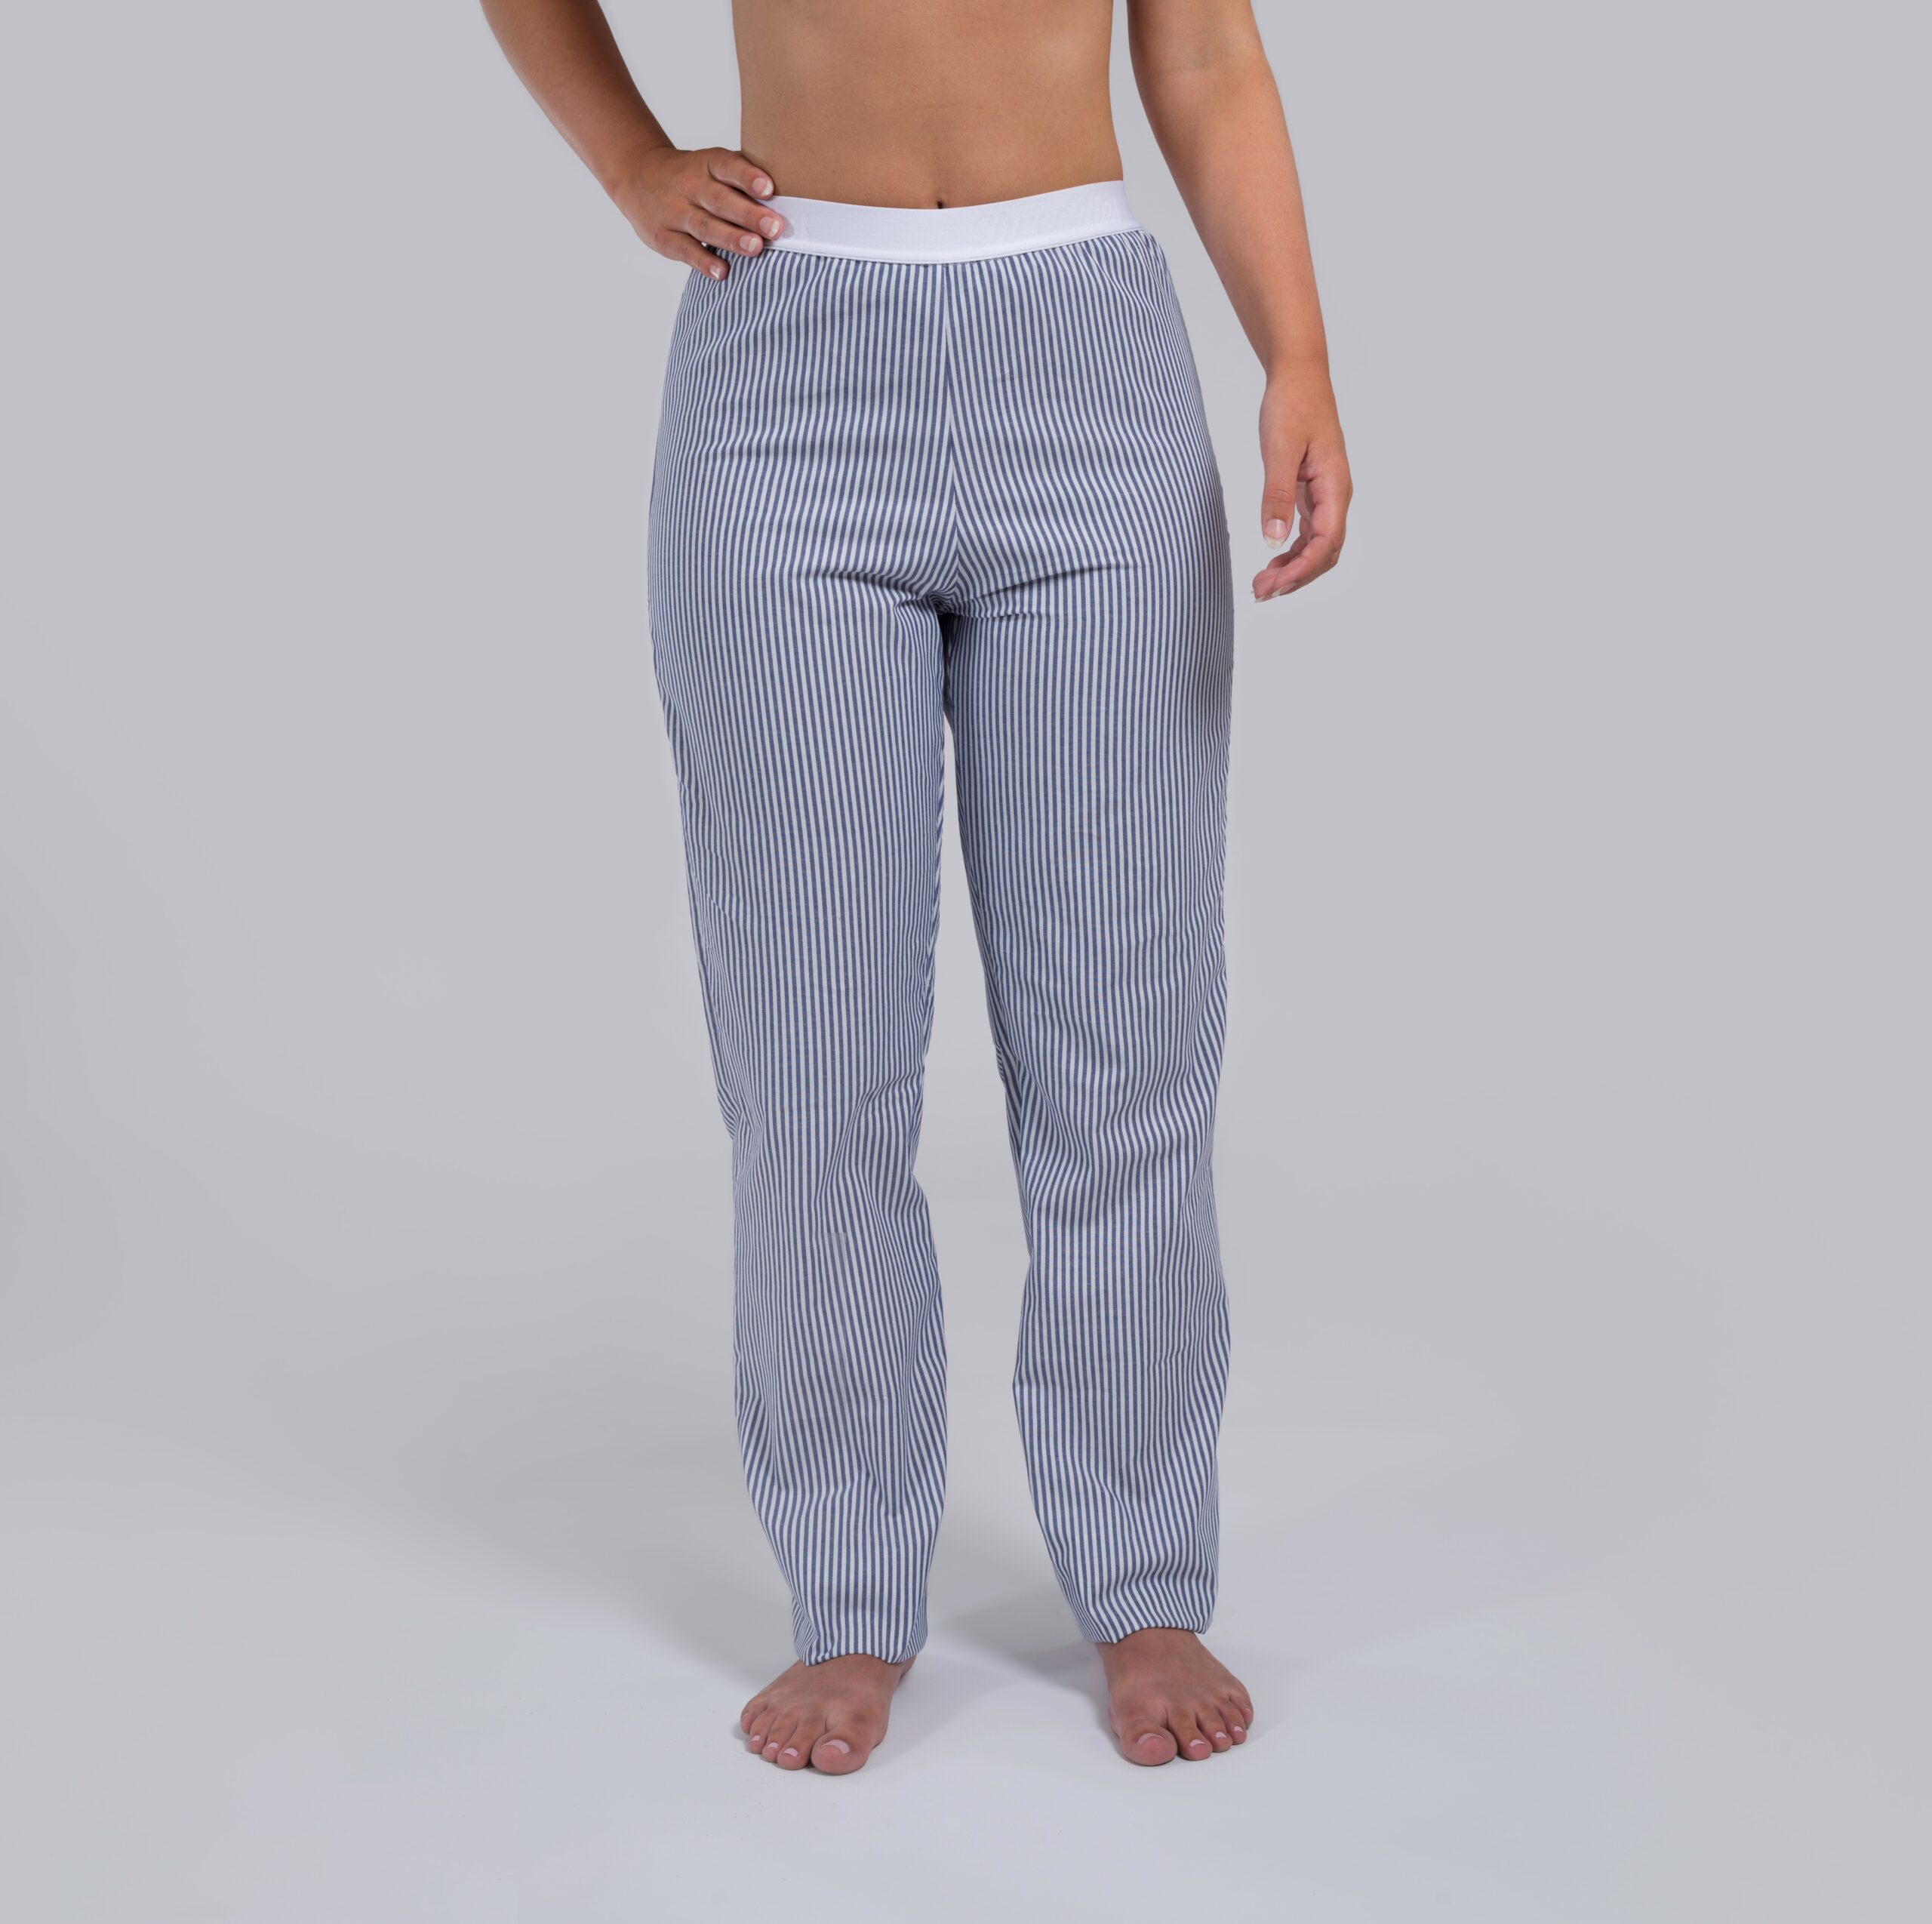 The original Shreddies Jeans and pyjamas that make your farts smell nice